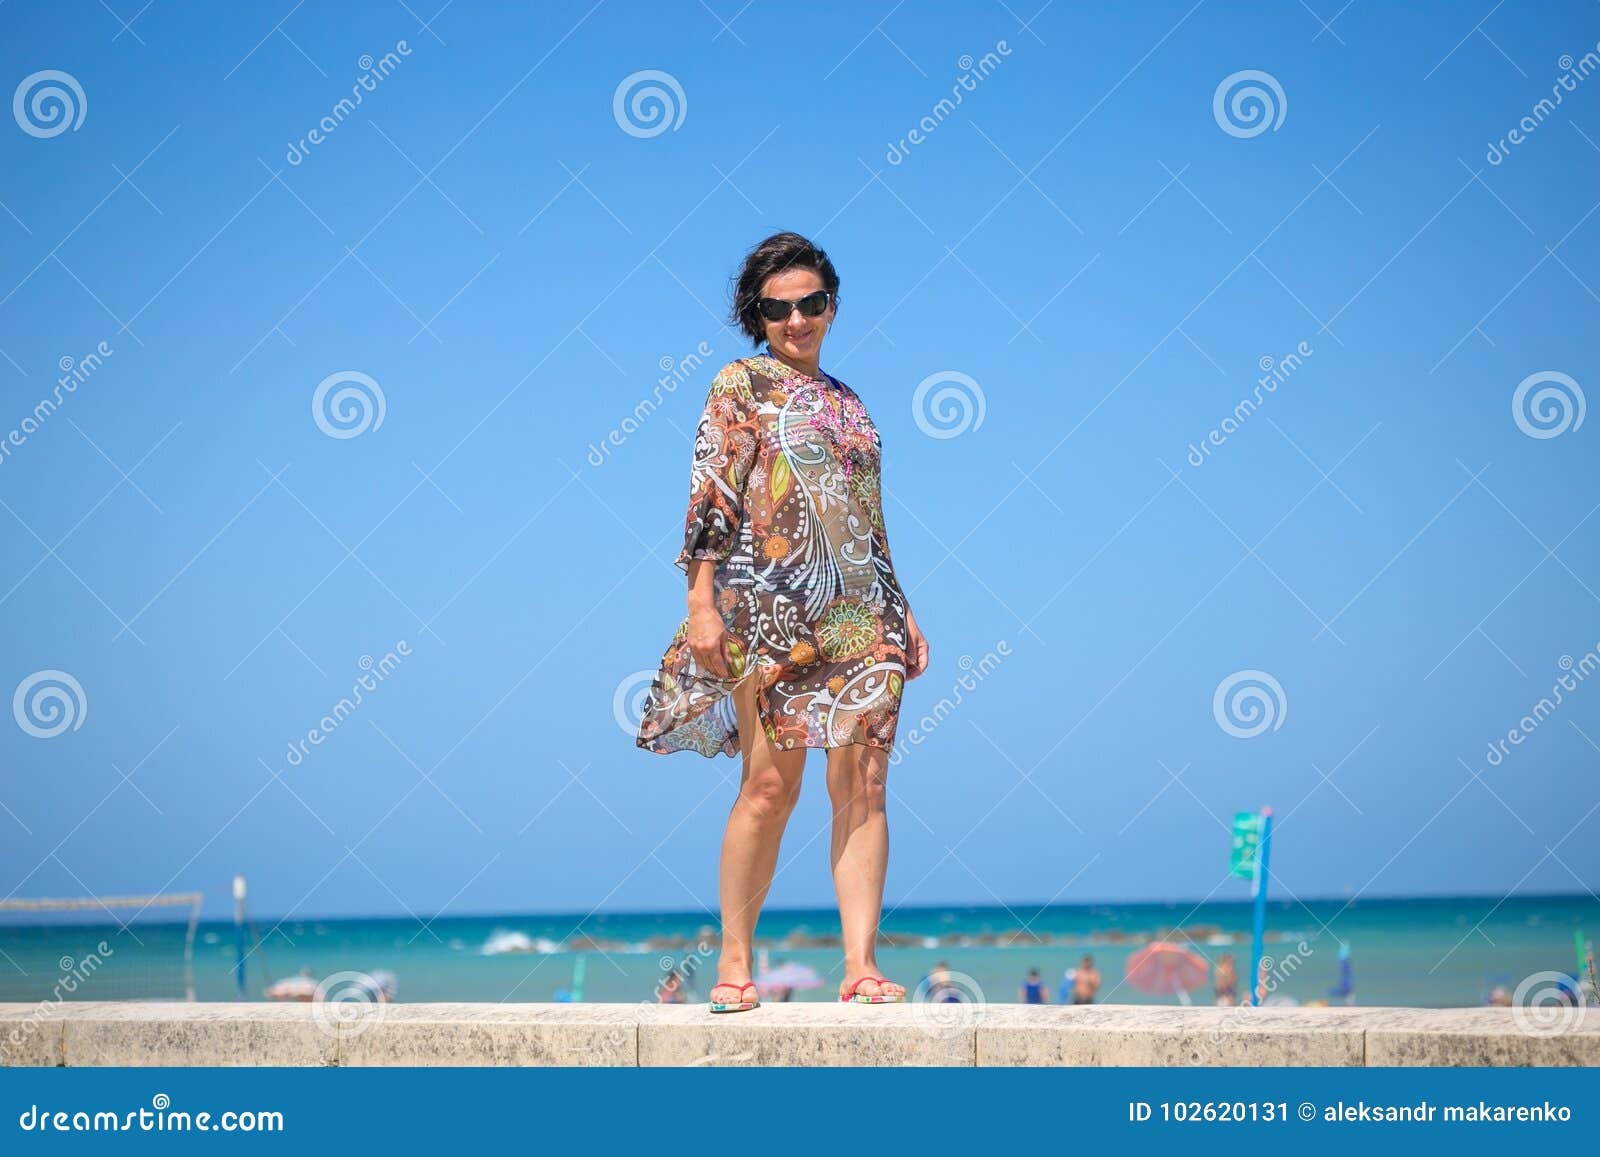 Beautiful Woman on the Beach in the Wind. Stock Image - Image of girl ...